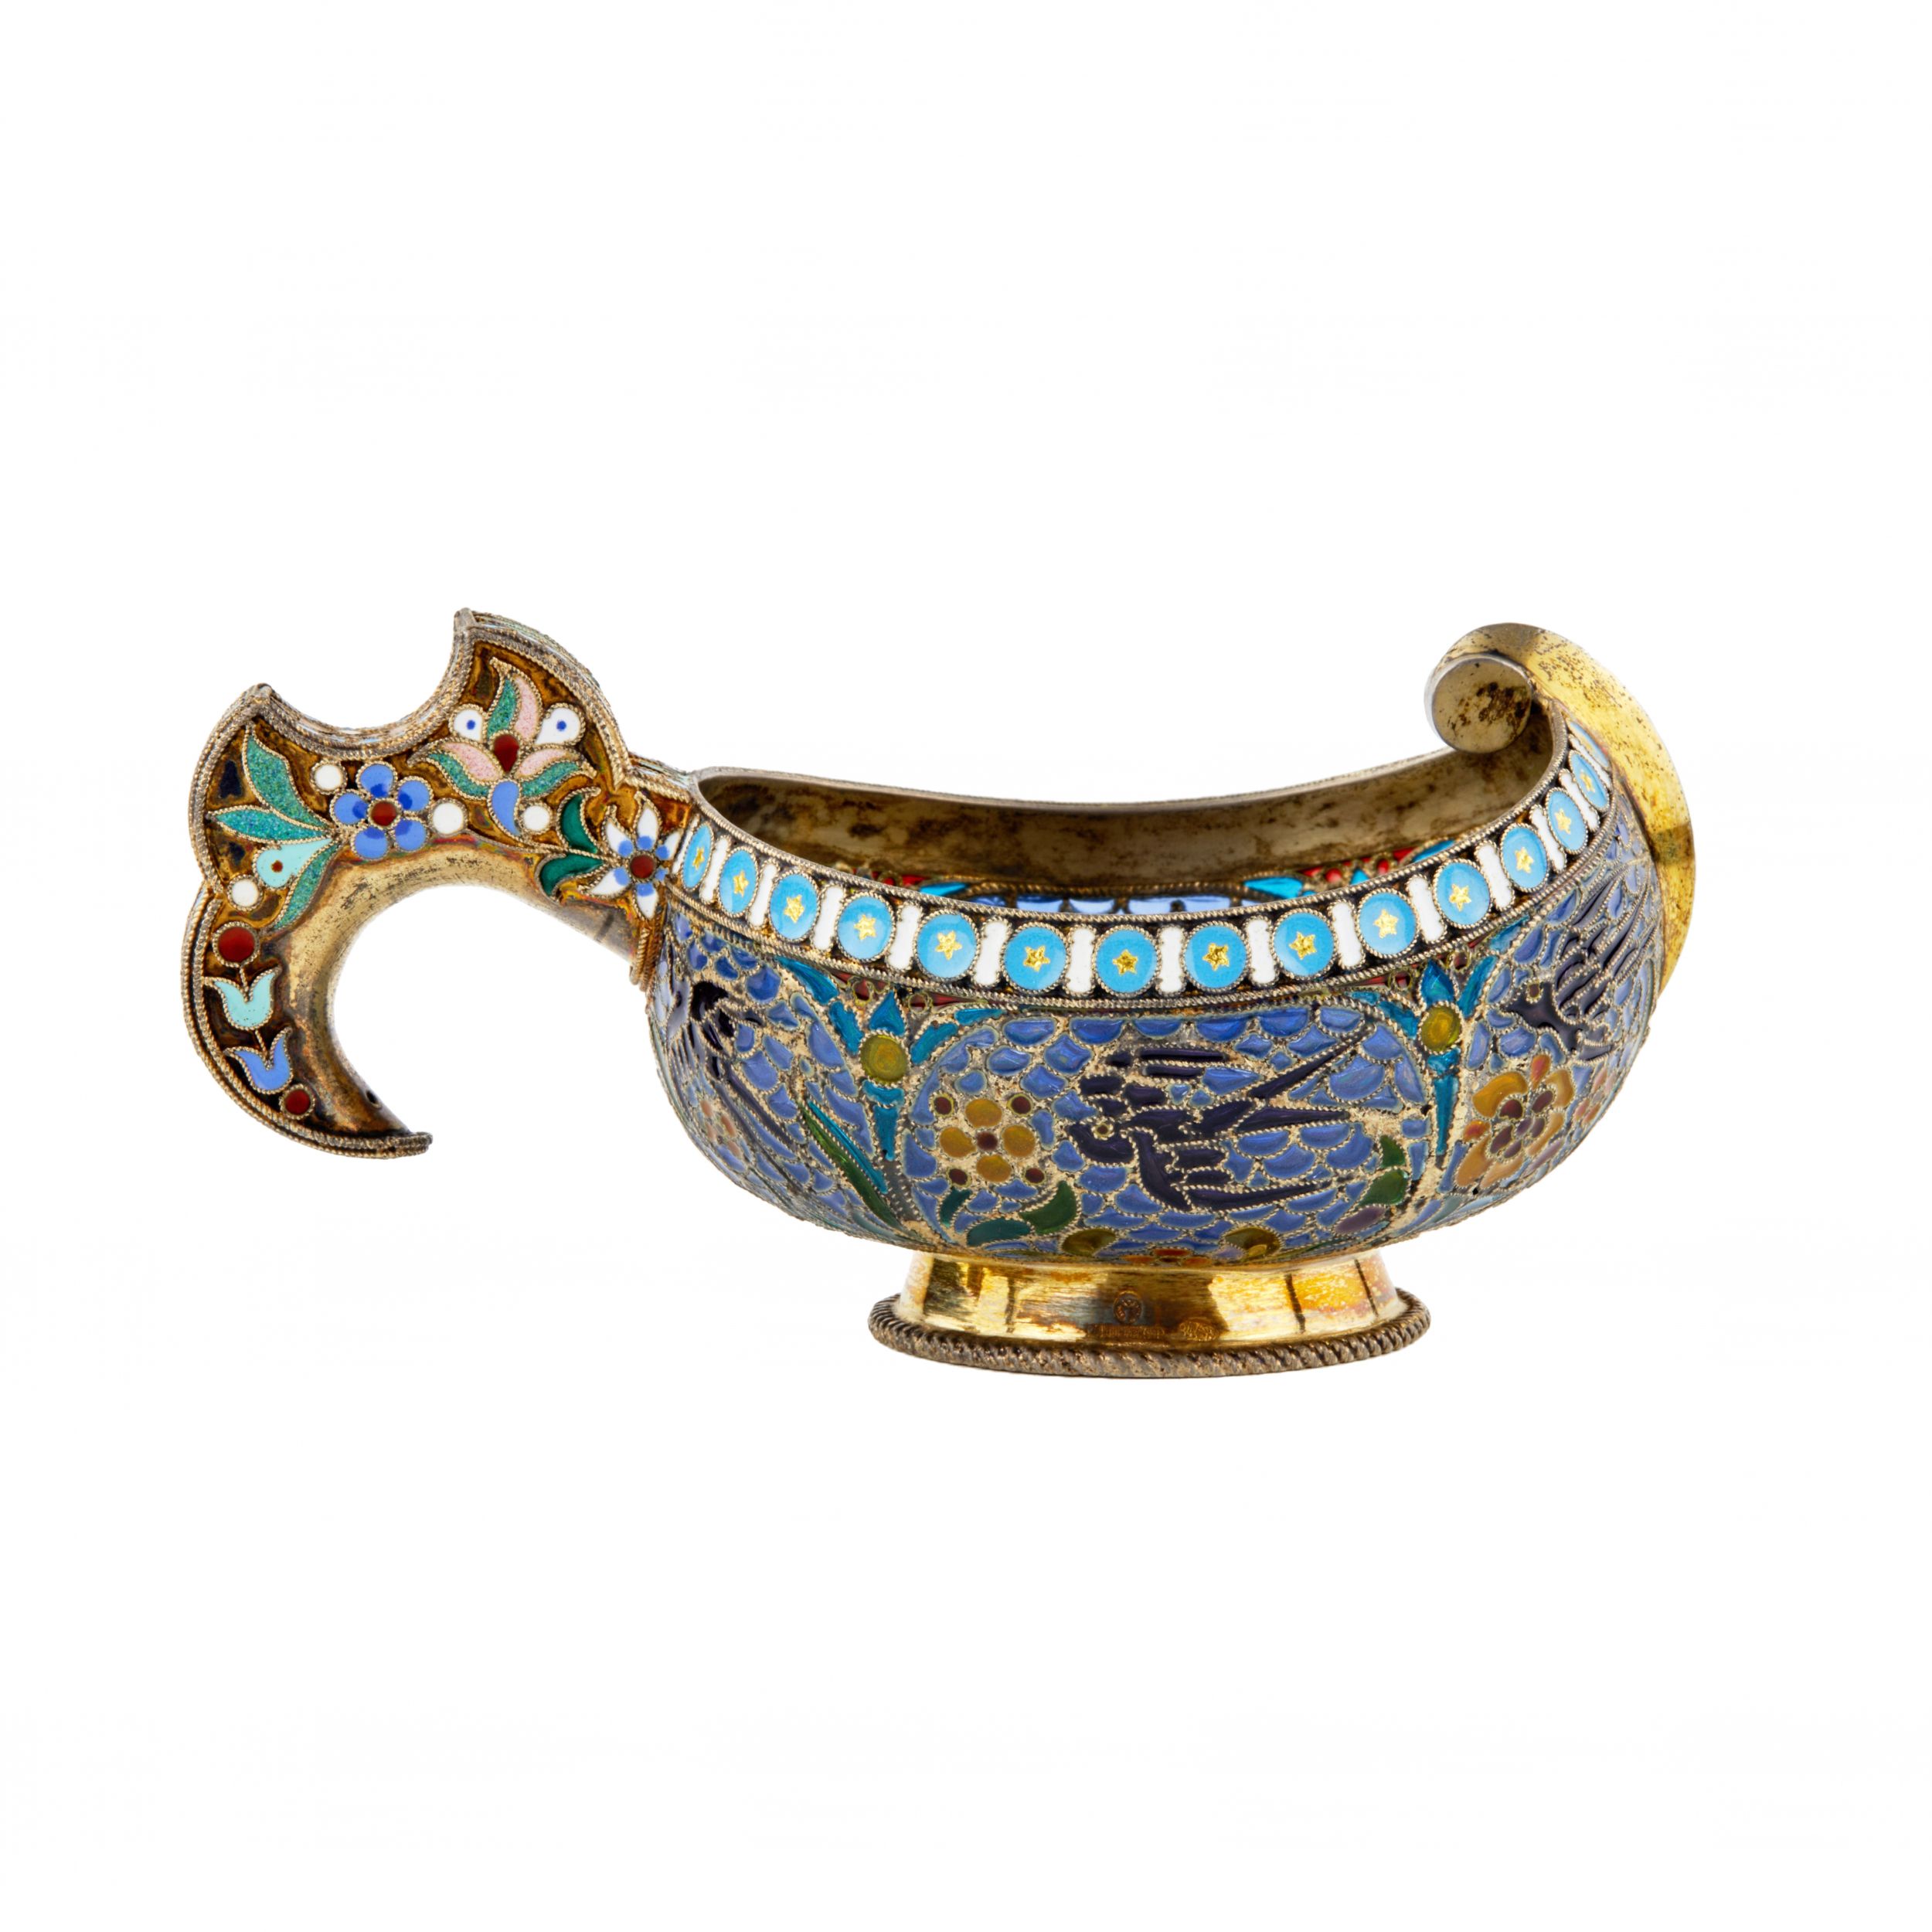 Silver-Kovsh-84-assay-P-Ovchinnikov-with-stained-glass-enamel-Moscow-At-the-turn-of-1900-